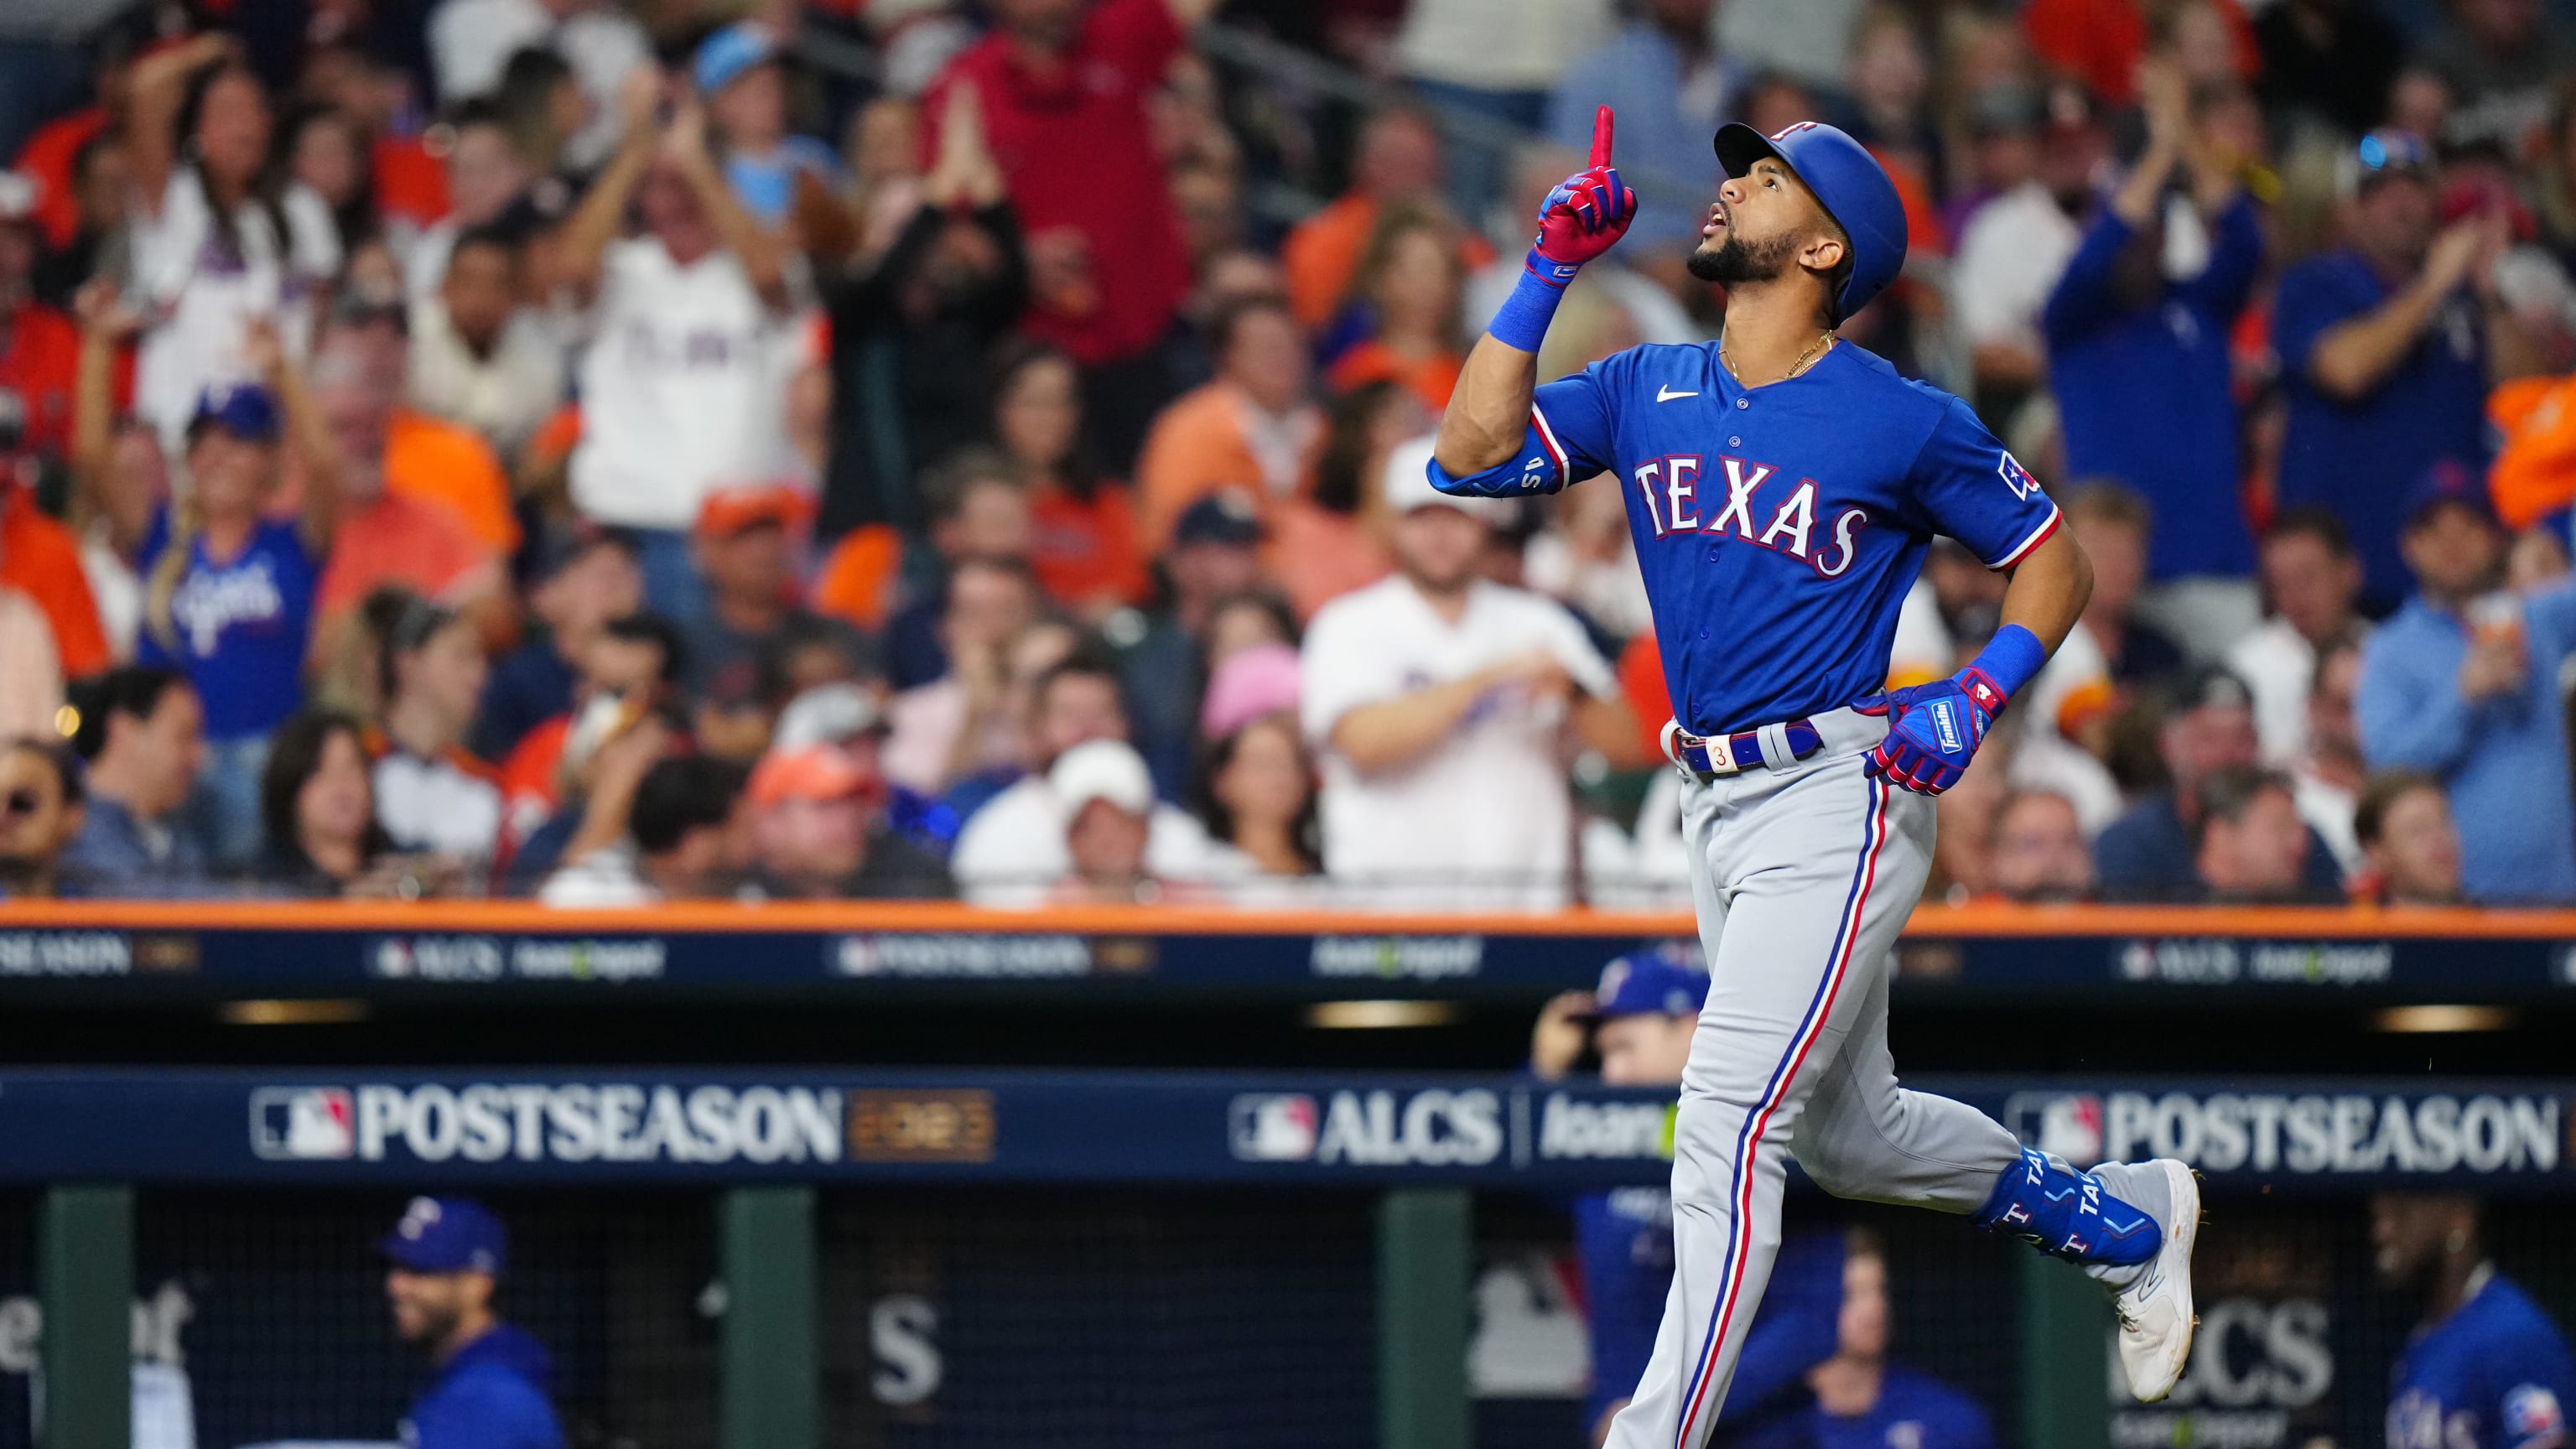 Montgomery shuts out Astros, Taveras homers as Rangers get win in